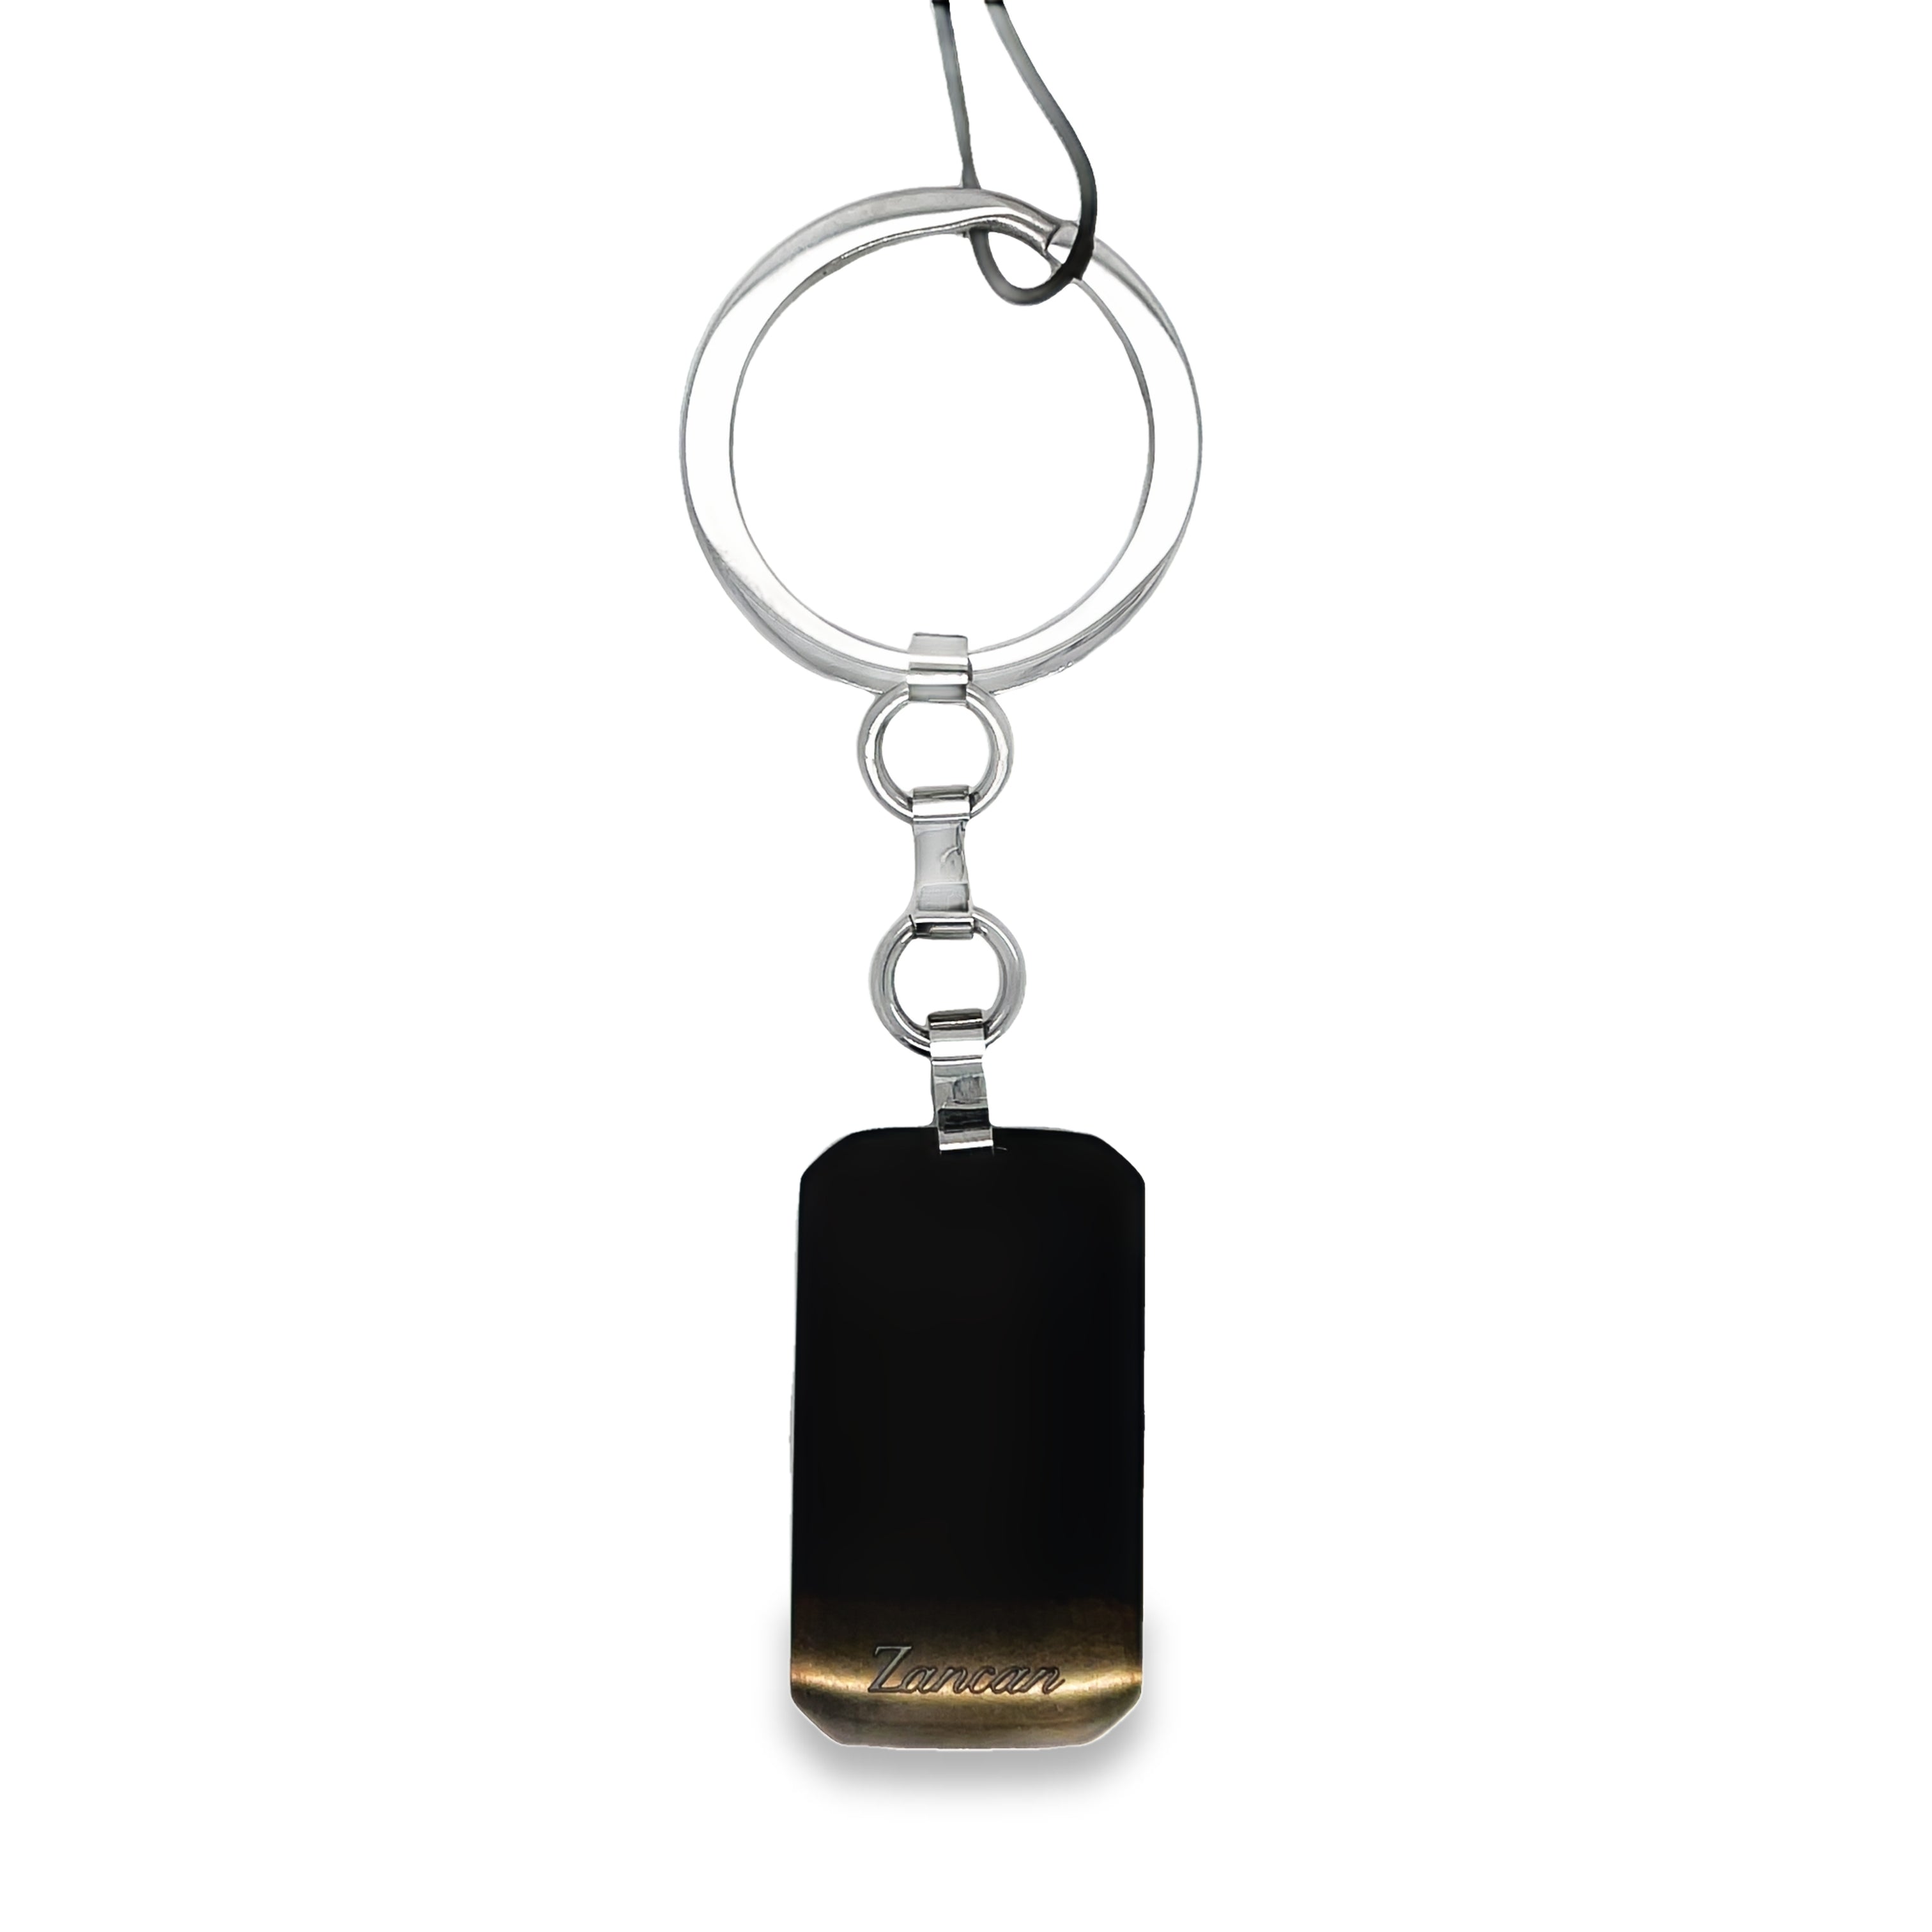 This Zancan key chain is made in Italy and crafted from high-quality stainless steel, ensuring durability and style. With its sleek design and superior material, it will elevate your everyday carry and keep your keys organized. A must-have for any discerning keychain collector.